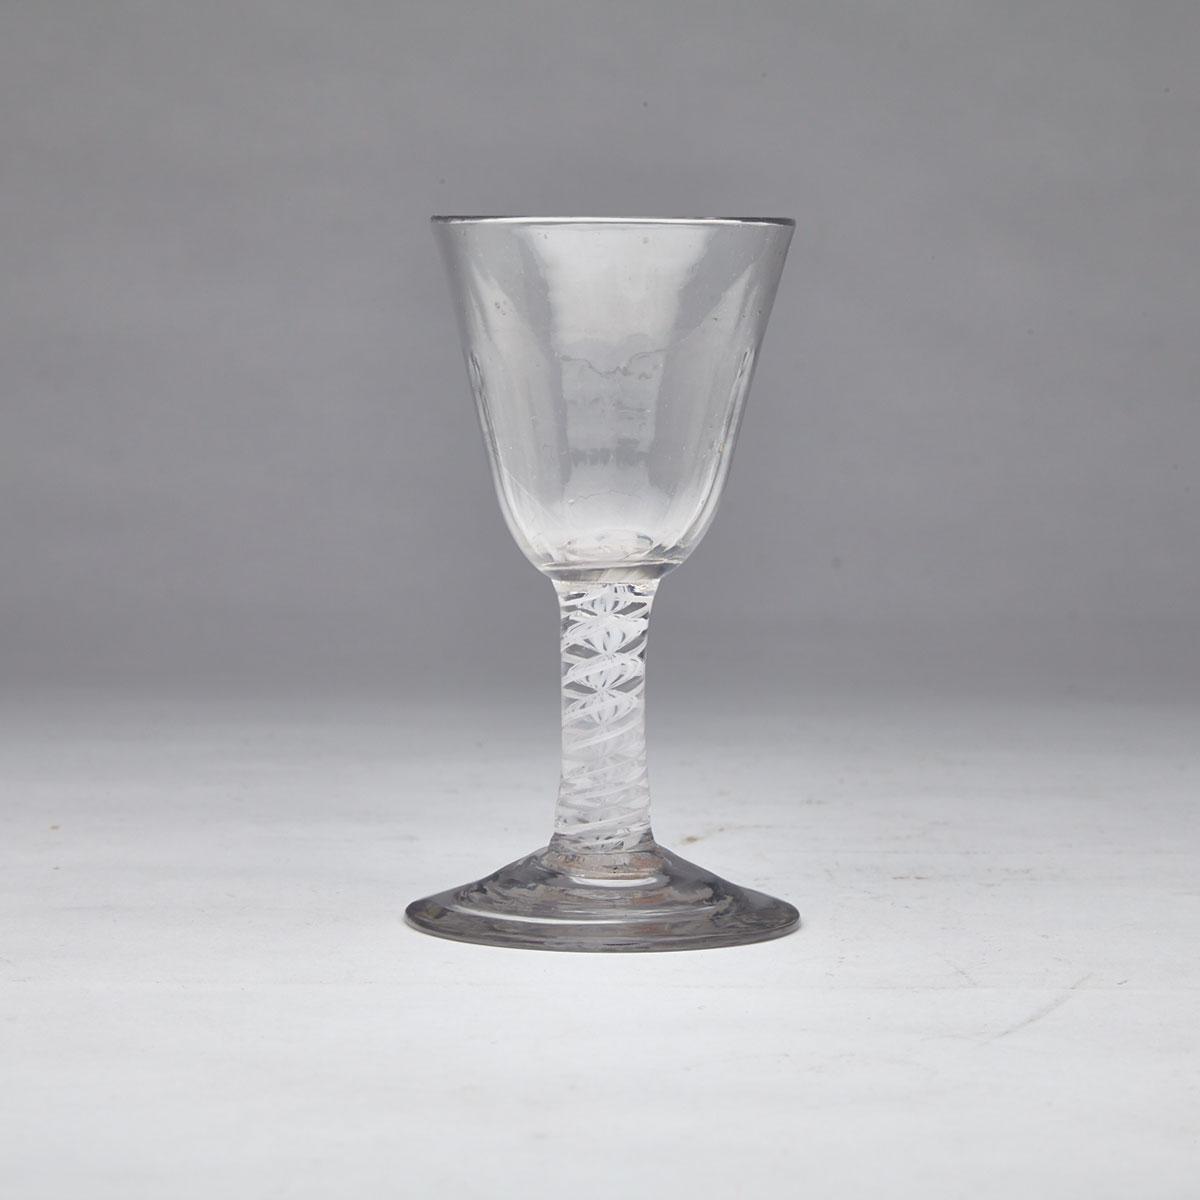 English Opaque Twist Stemmed Glass Cordial, c.1760-80